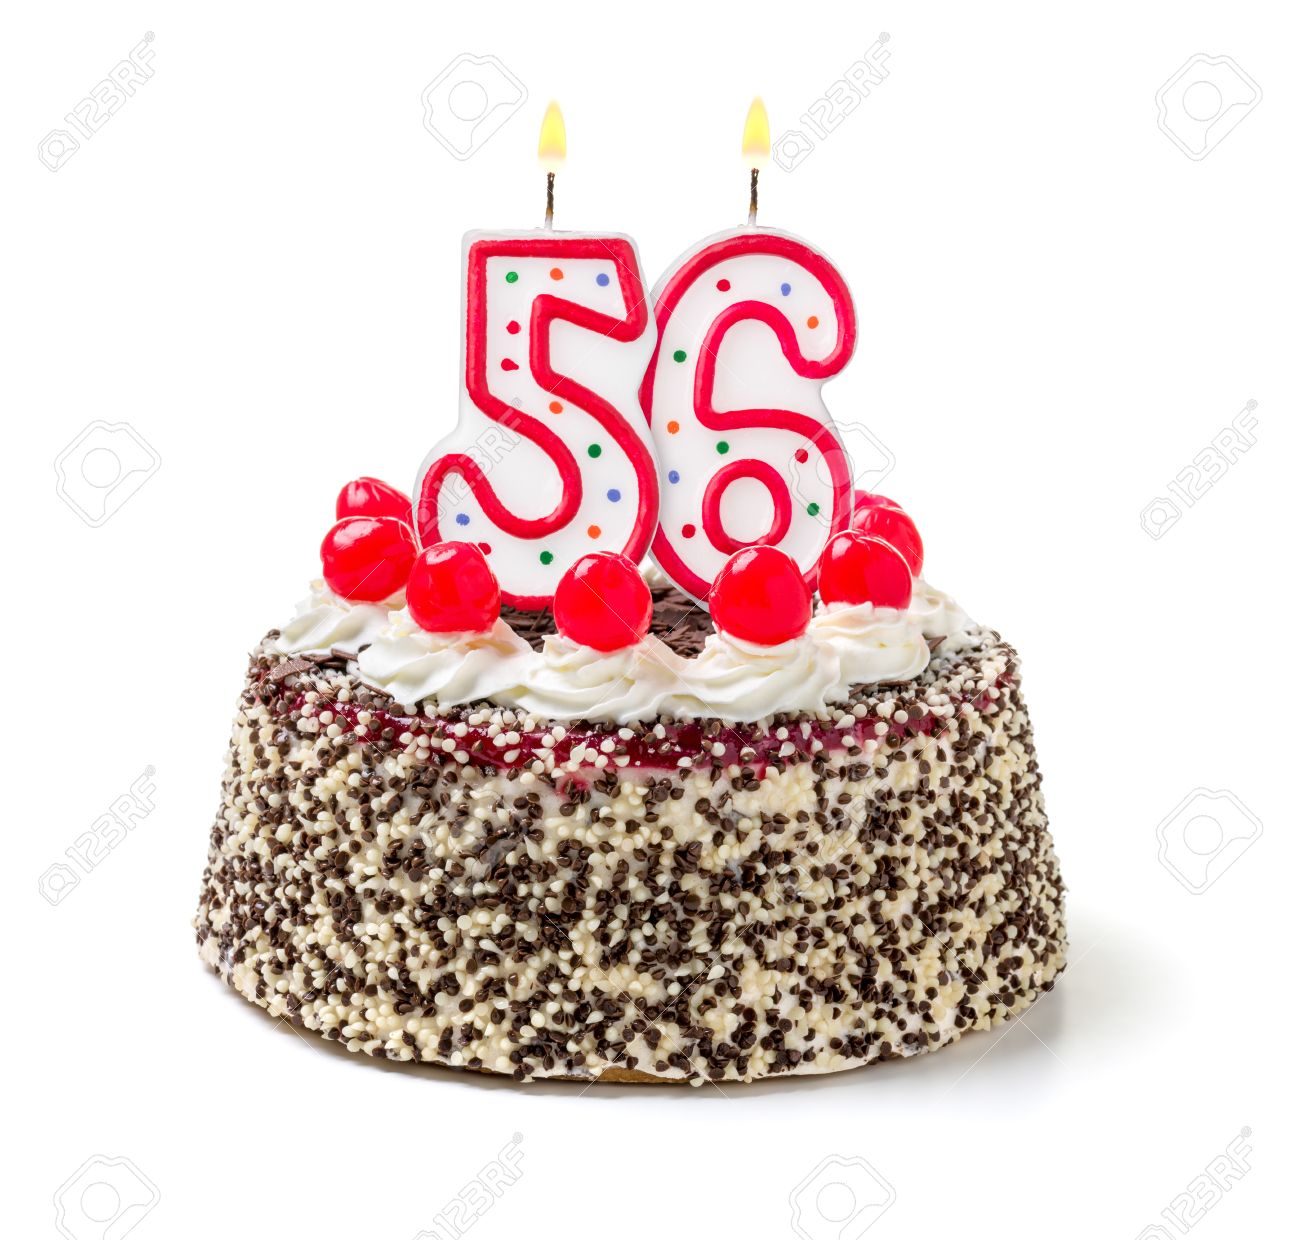 32579624-birthday-cake-with-burning-candle-number-56.jpg